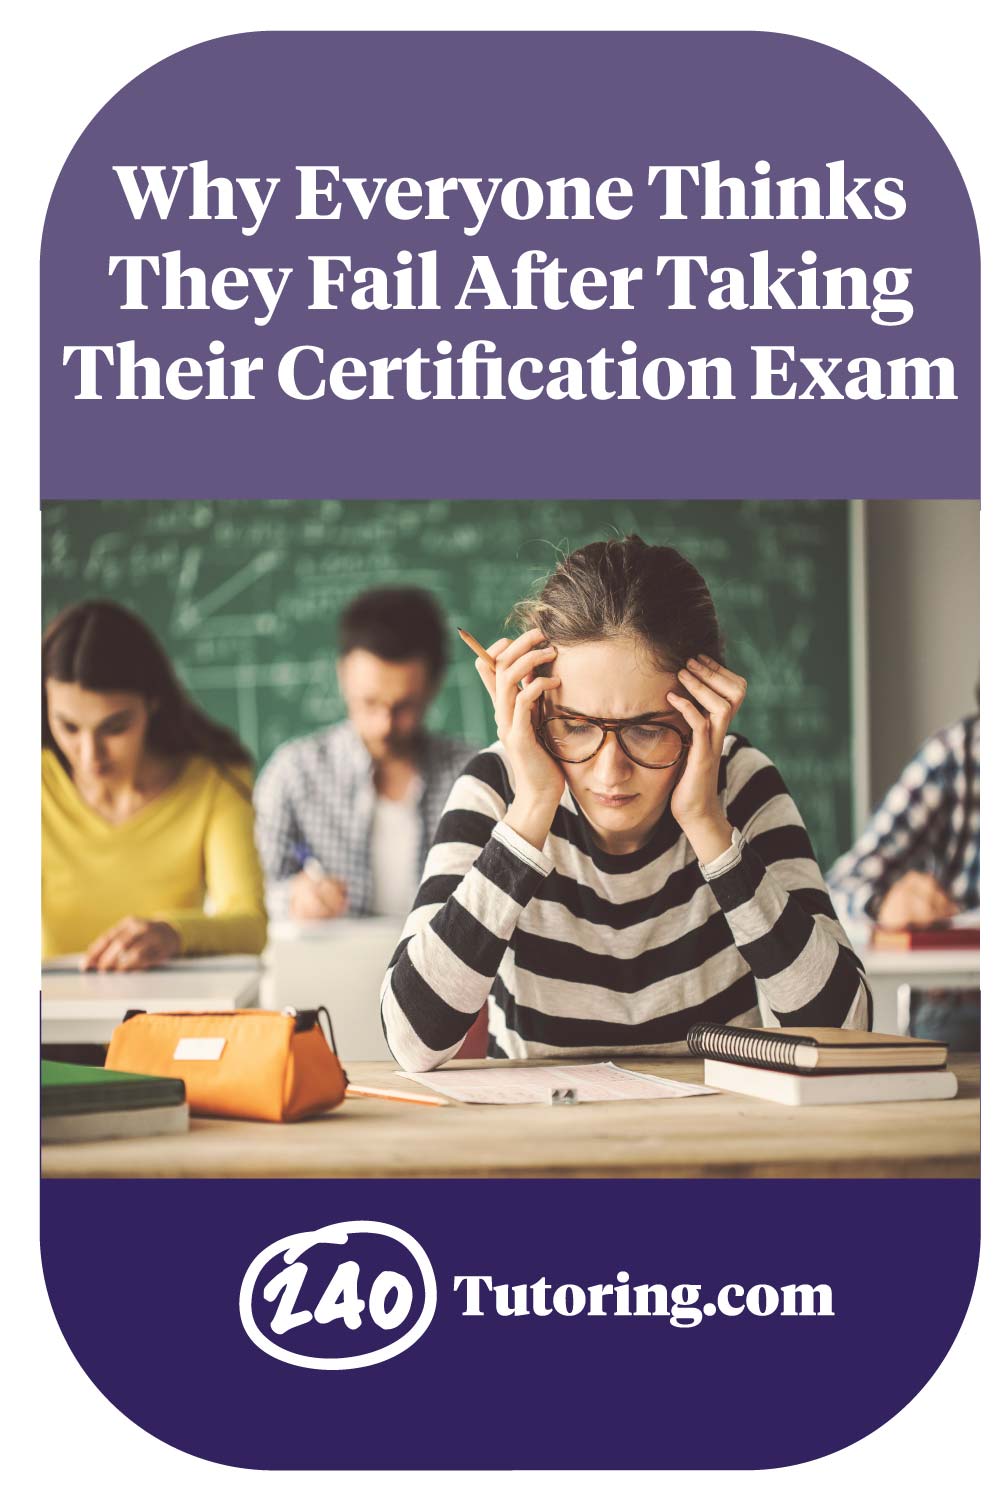 Why Everyone Thinks They Fail After Taking Their Certification Exam